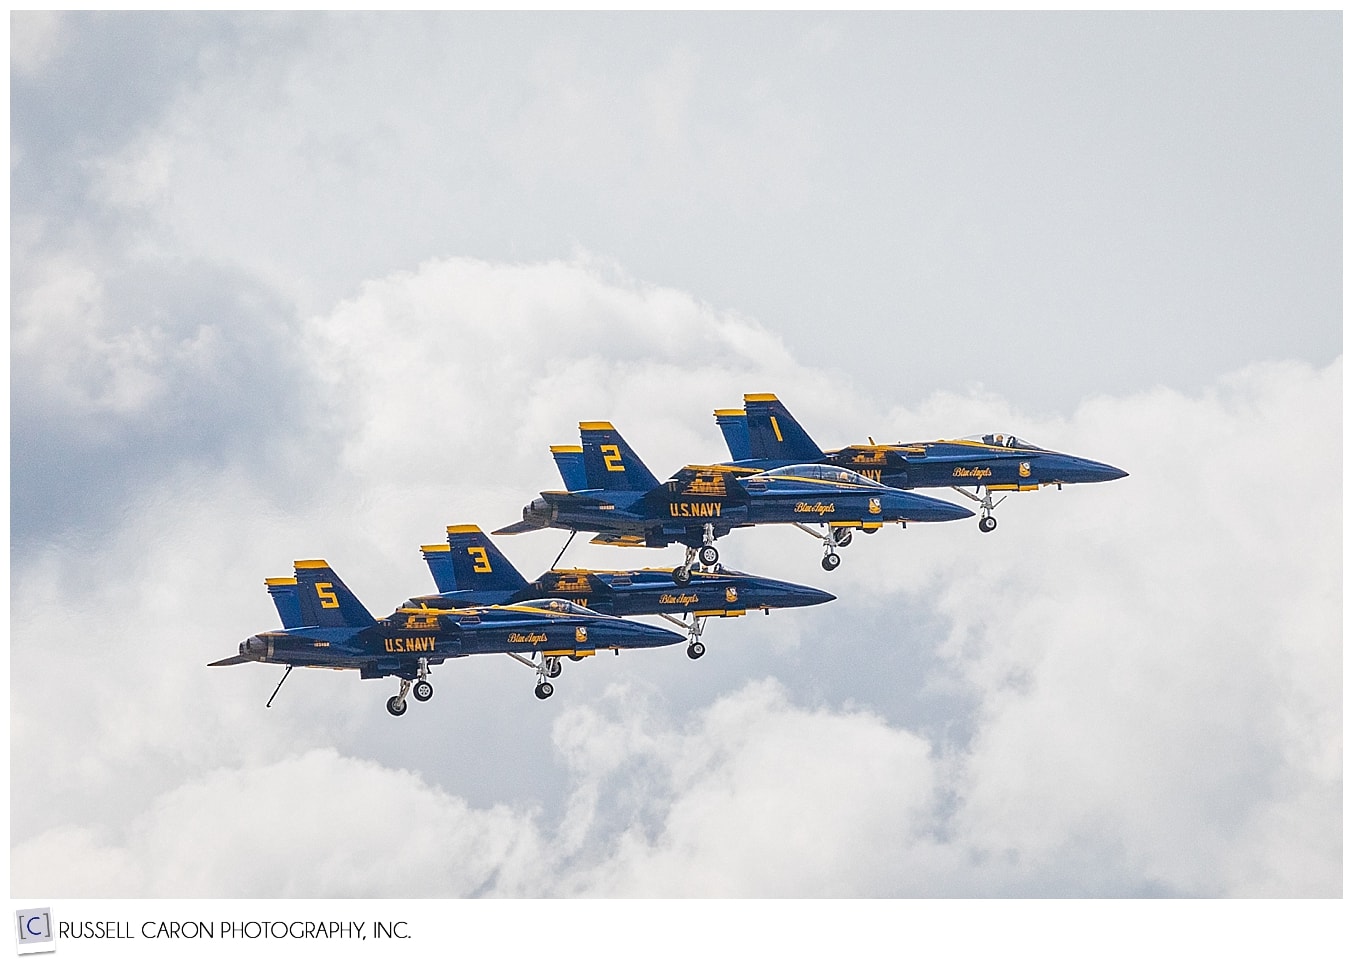 4 of the US Navy Blue Angels during the Great State of Maine Air Show in Brunswick Maine